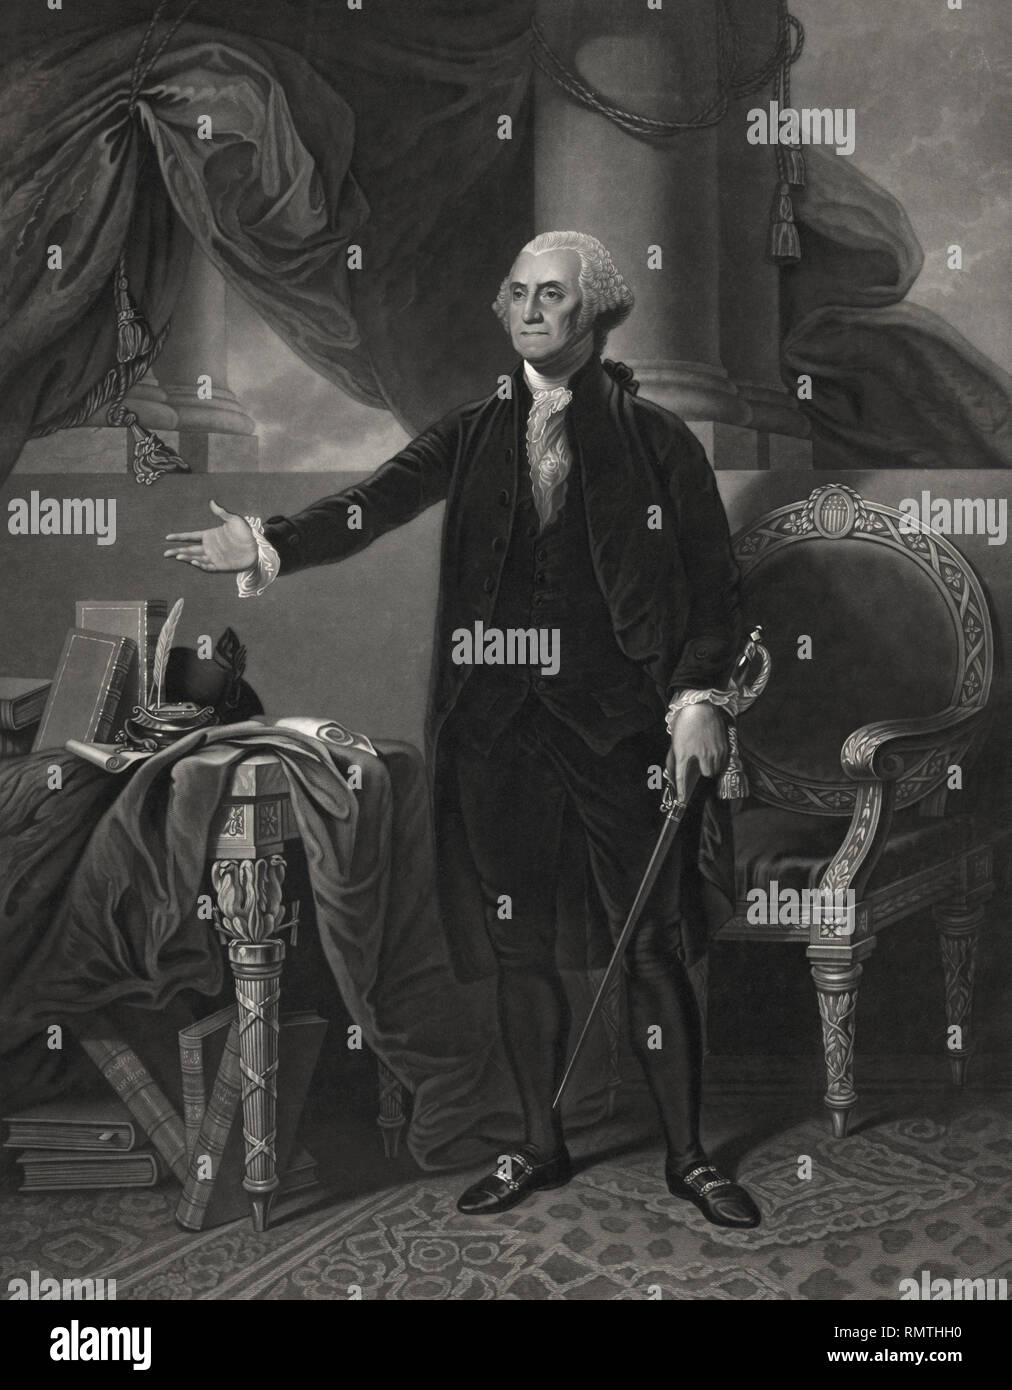 George Washington (1732-99), First President of the United States, Full-Length Portrait, Engraving by Henry S. Sadd from a Painting by Gilbert Stuart, Printed by John Neale, 1844 Stock Photo